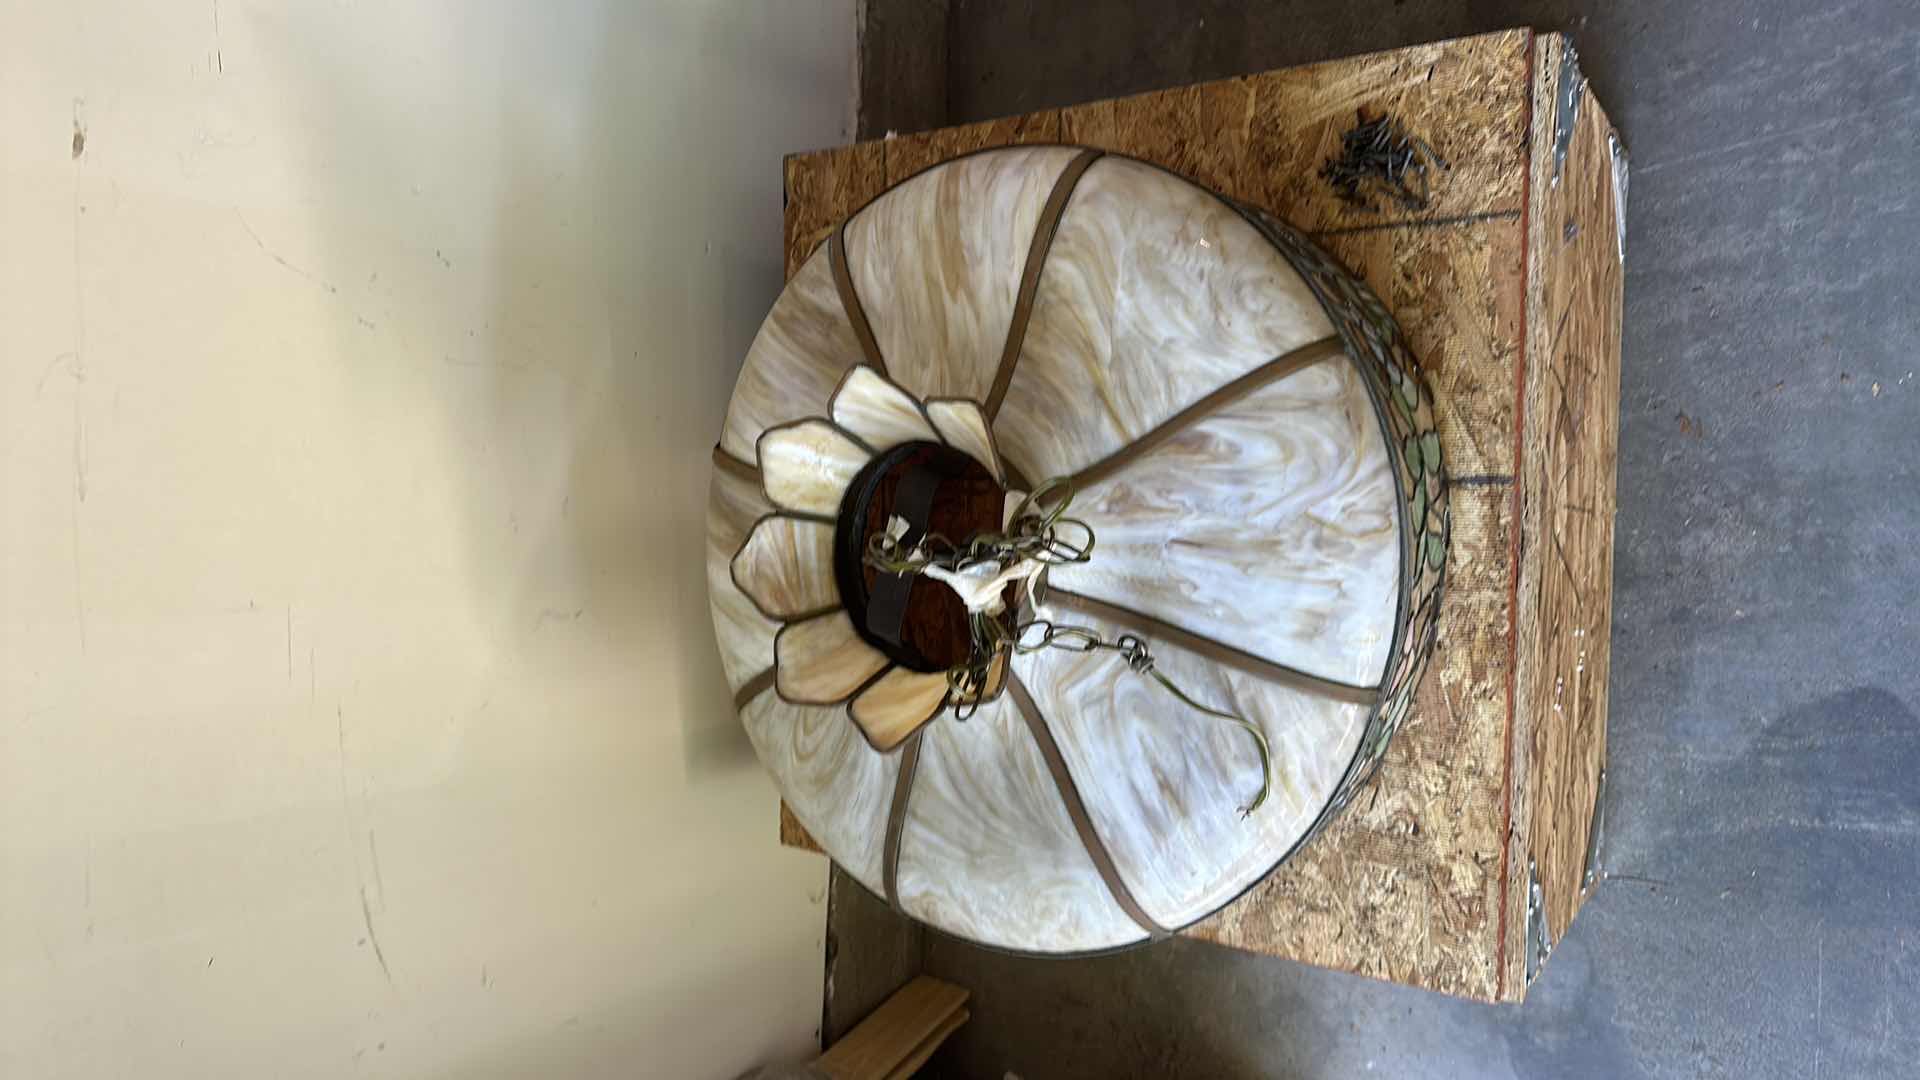 Photo 3 of CIRCA 1900 HANGING TIFFANY STYLE STAINED GLASS LAMP W 8 BENT AMBER GLASS PANELS IN A PANEL CROWN AT TOP, BLUE BASKET W DEEP RED CHERRIES & PINK FLOWER BLOSSOMS (INCLUDES INSURANCE APPRAISAL DONE IN 1992. (24.5” X 14.5”)